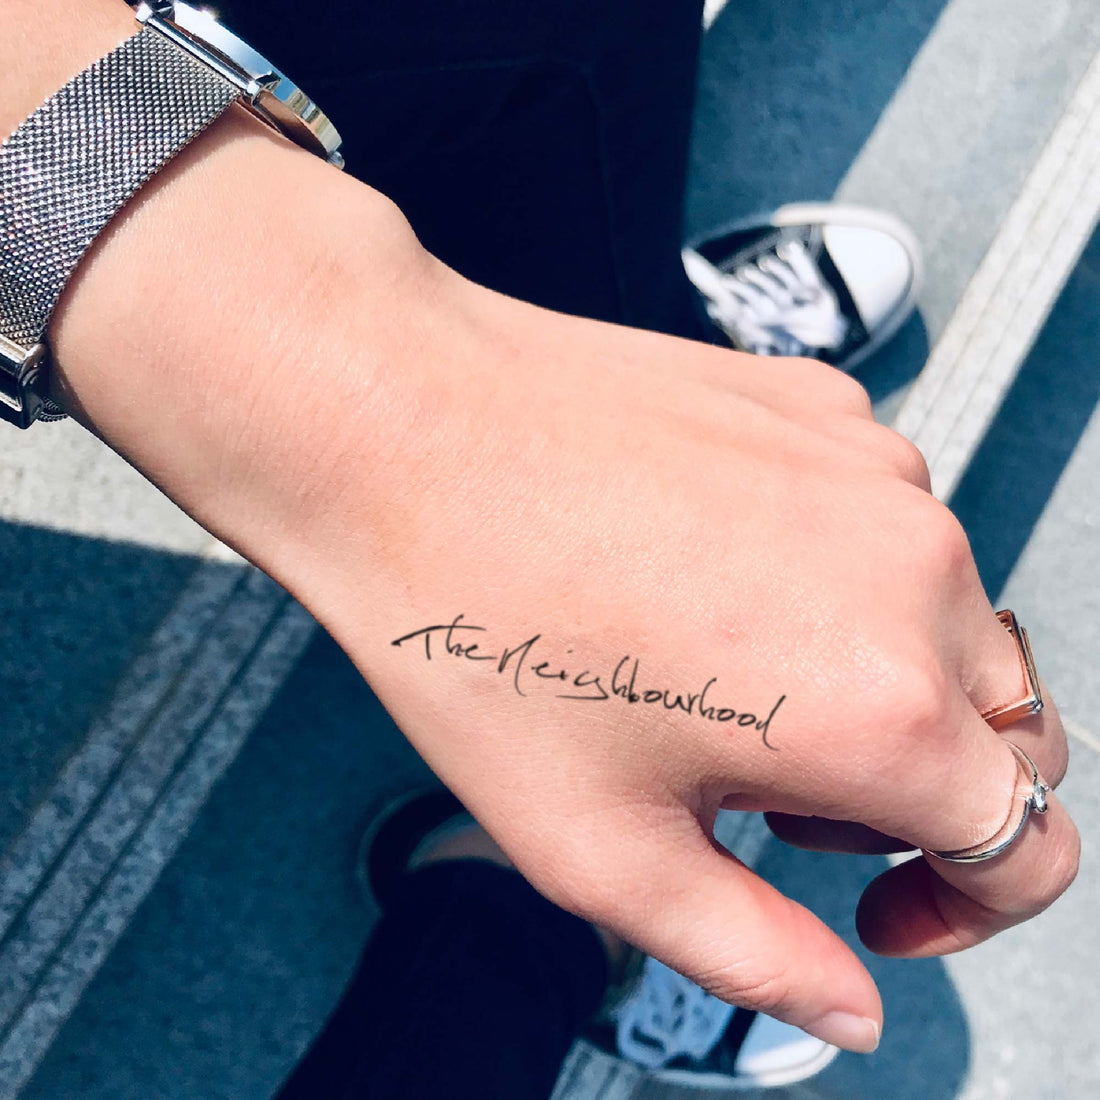 The Neighbourhood custom temporary tattoo sticker design idea inspiration meanings removal arm wrist hand words font name signature calligraphy lyrics tour concert outfits merch accessory gift souvenir costumes wear dress up code